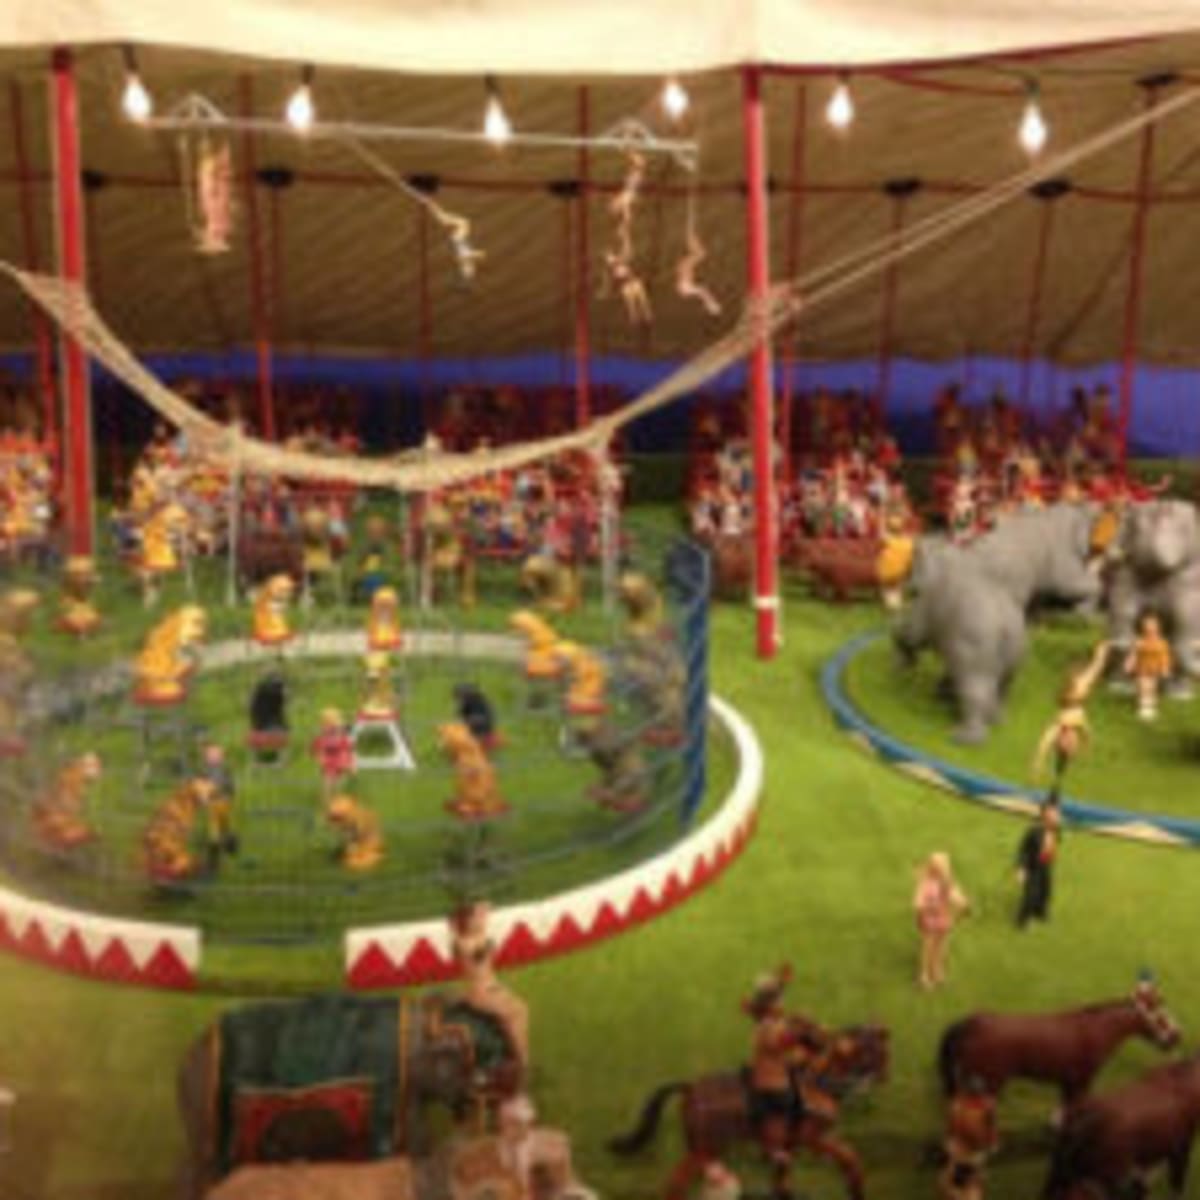 Hand-crafted miniature circus needs home - Antique Trader